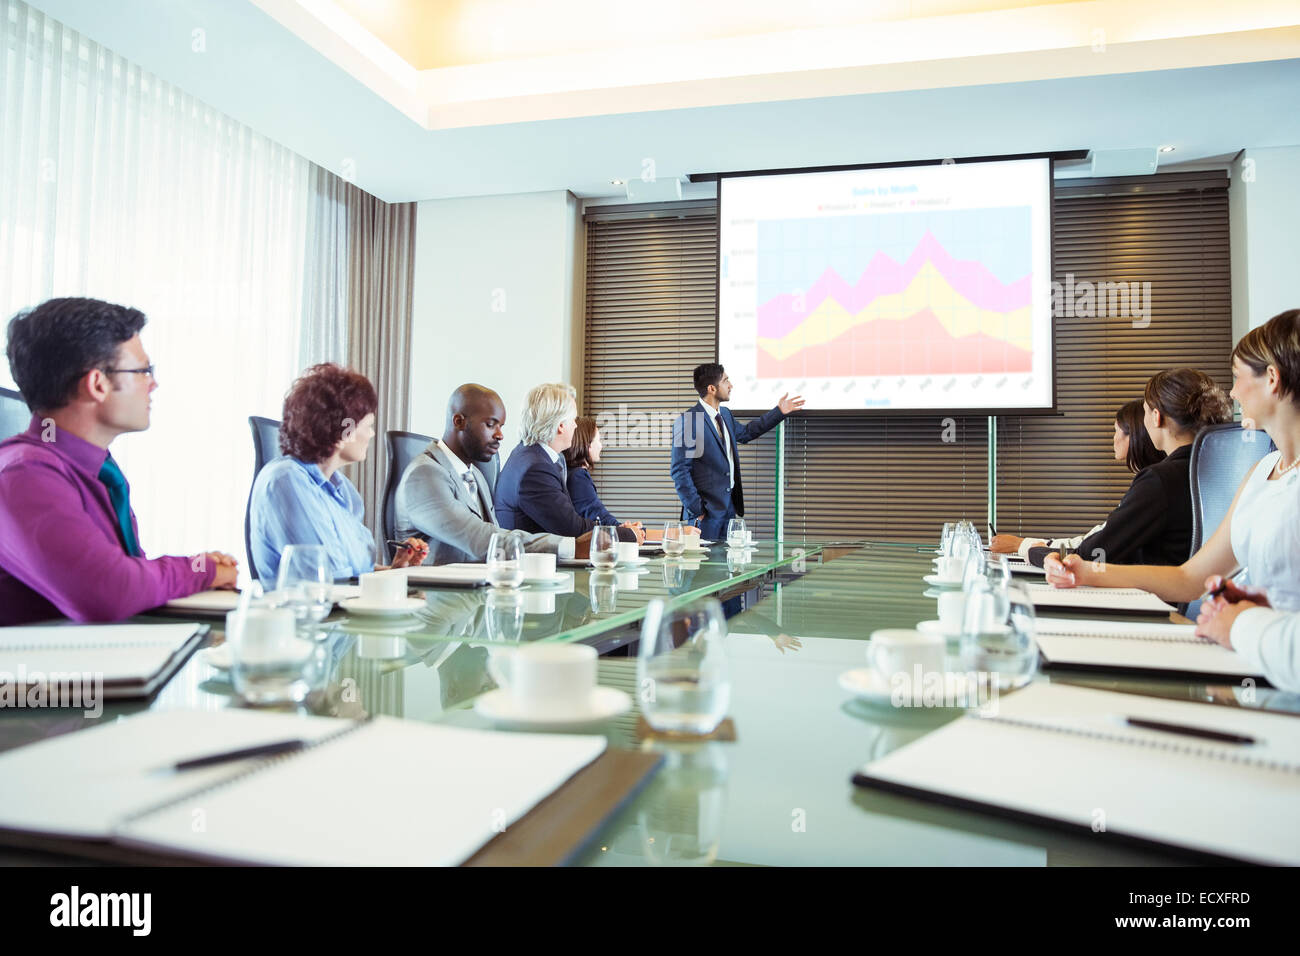 Multiethnic group of people listening to presentation in conference room Stock Photo